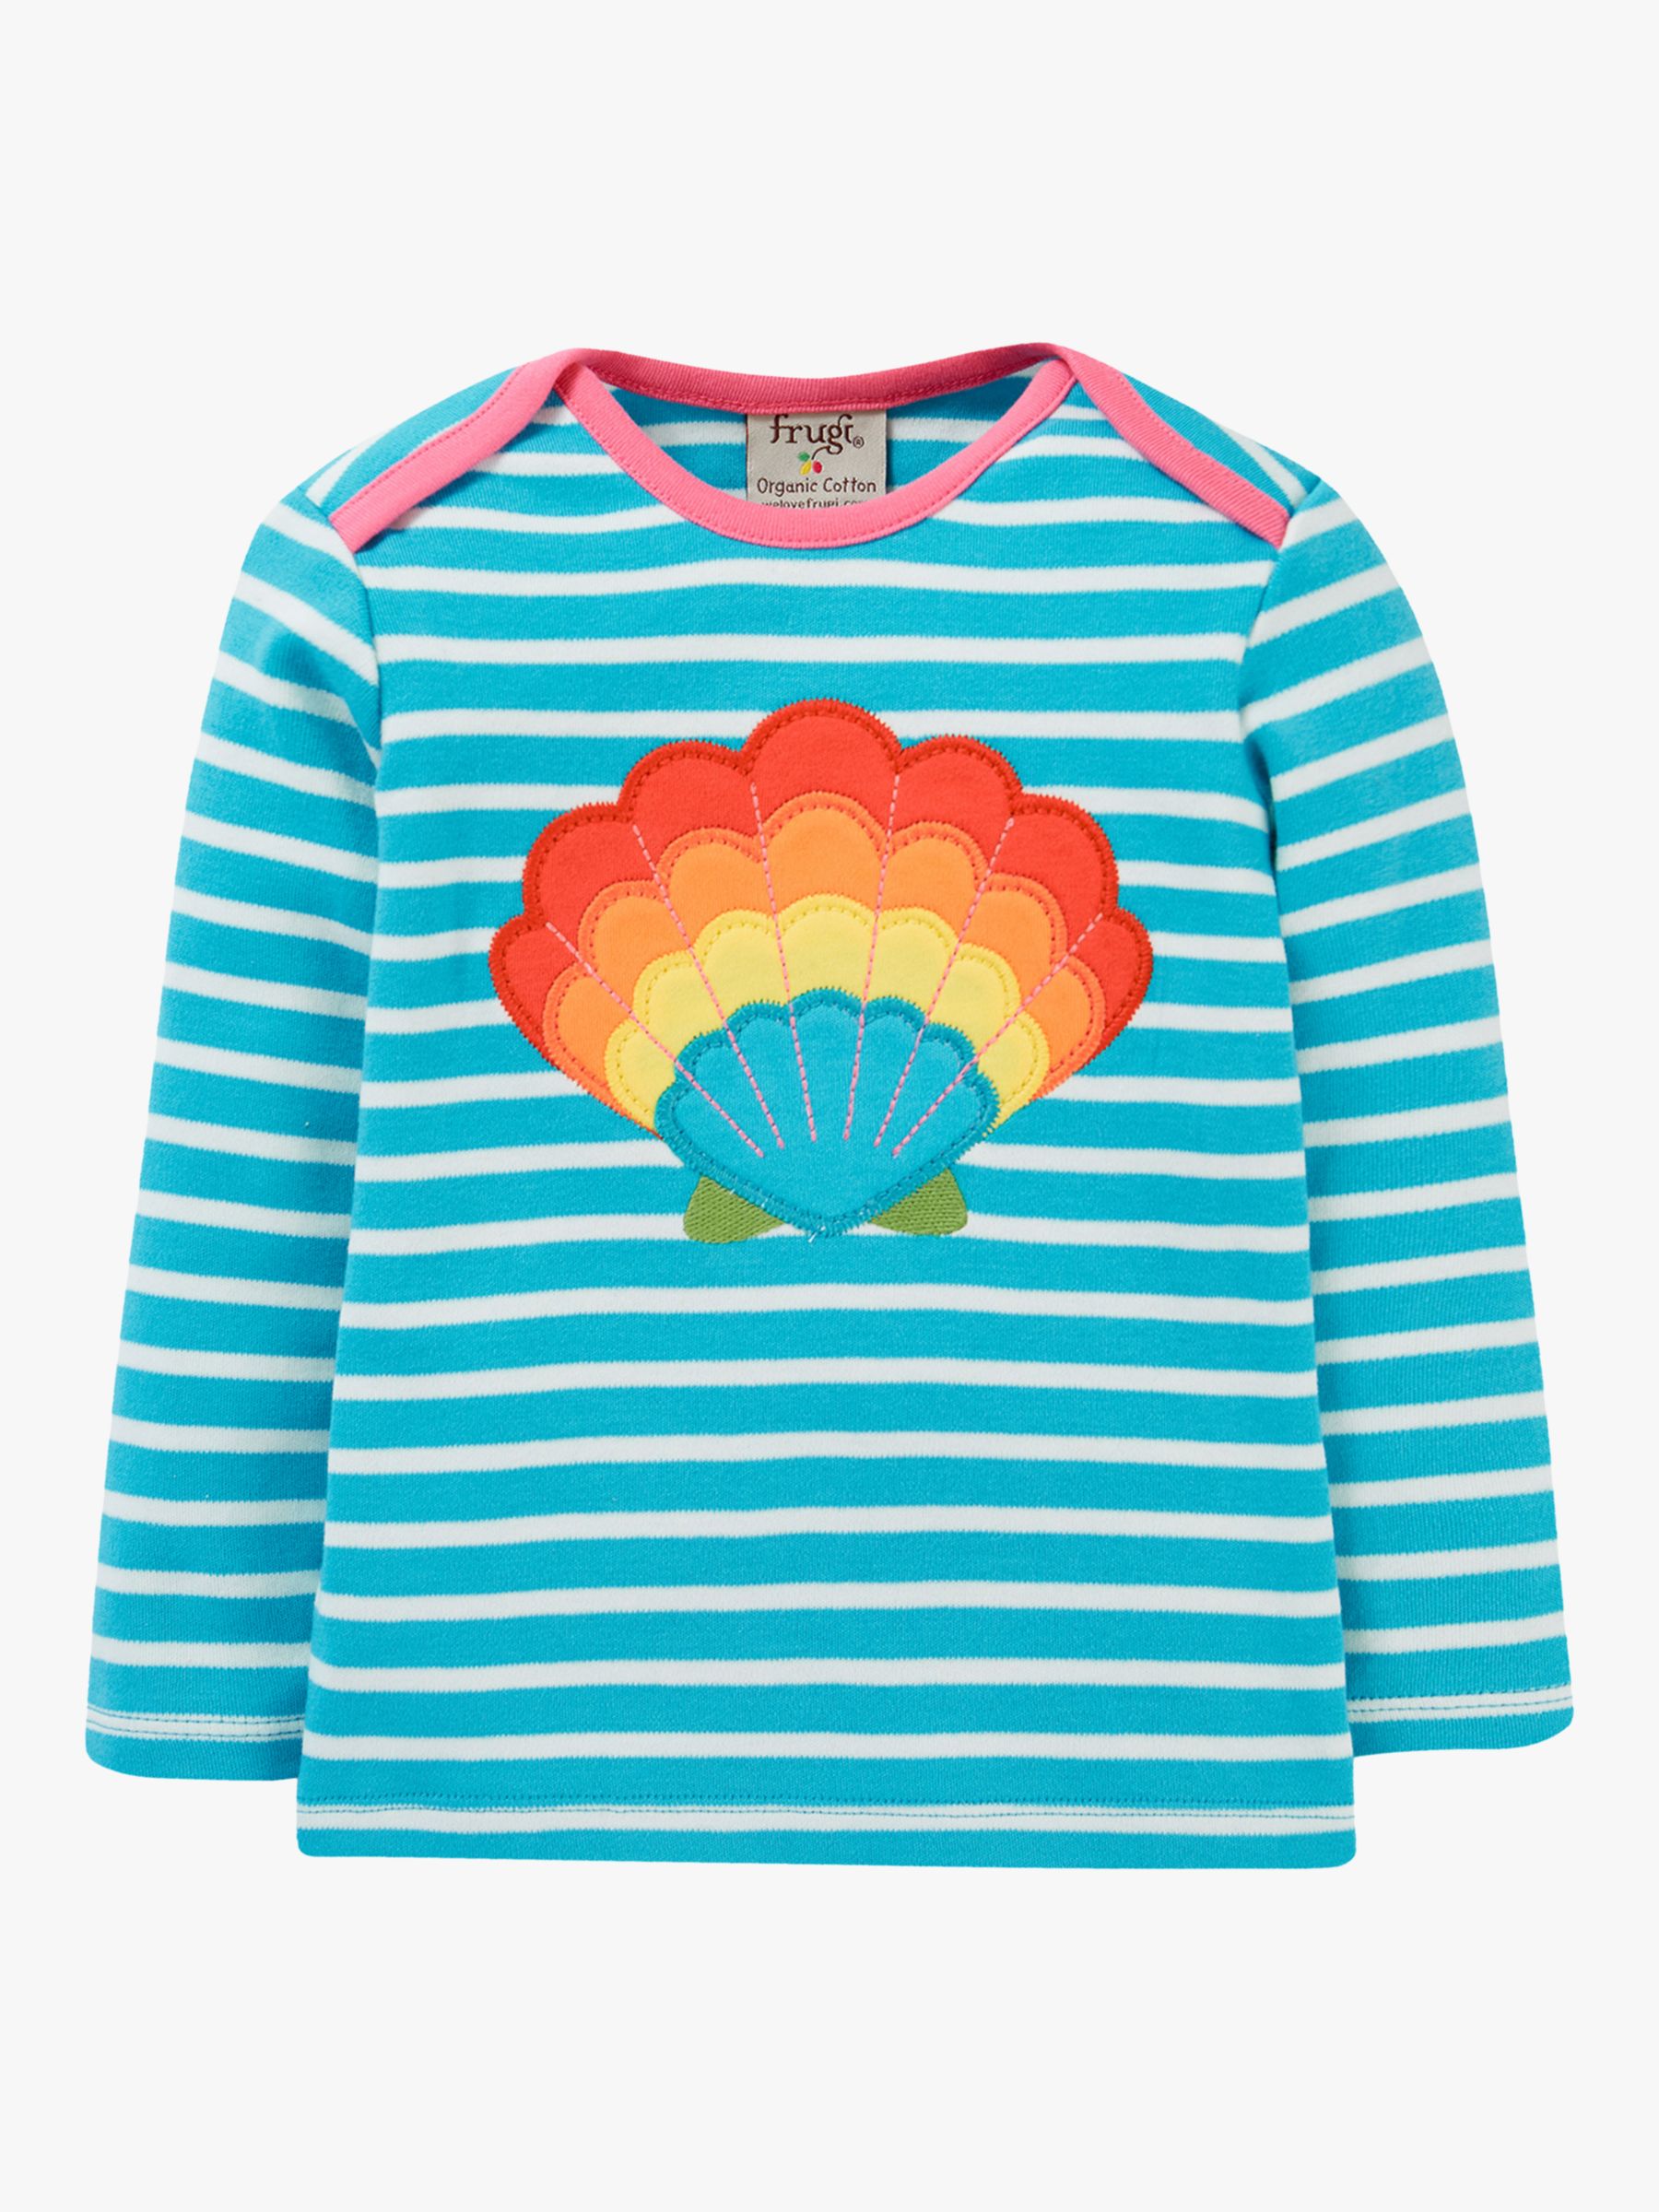 Frugi Baby Organic Cotton Bobby Shell Applique Stripe Top, Tropical Sea, 6-9 months